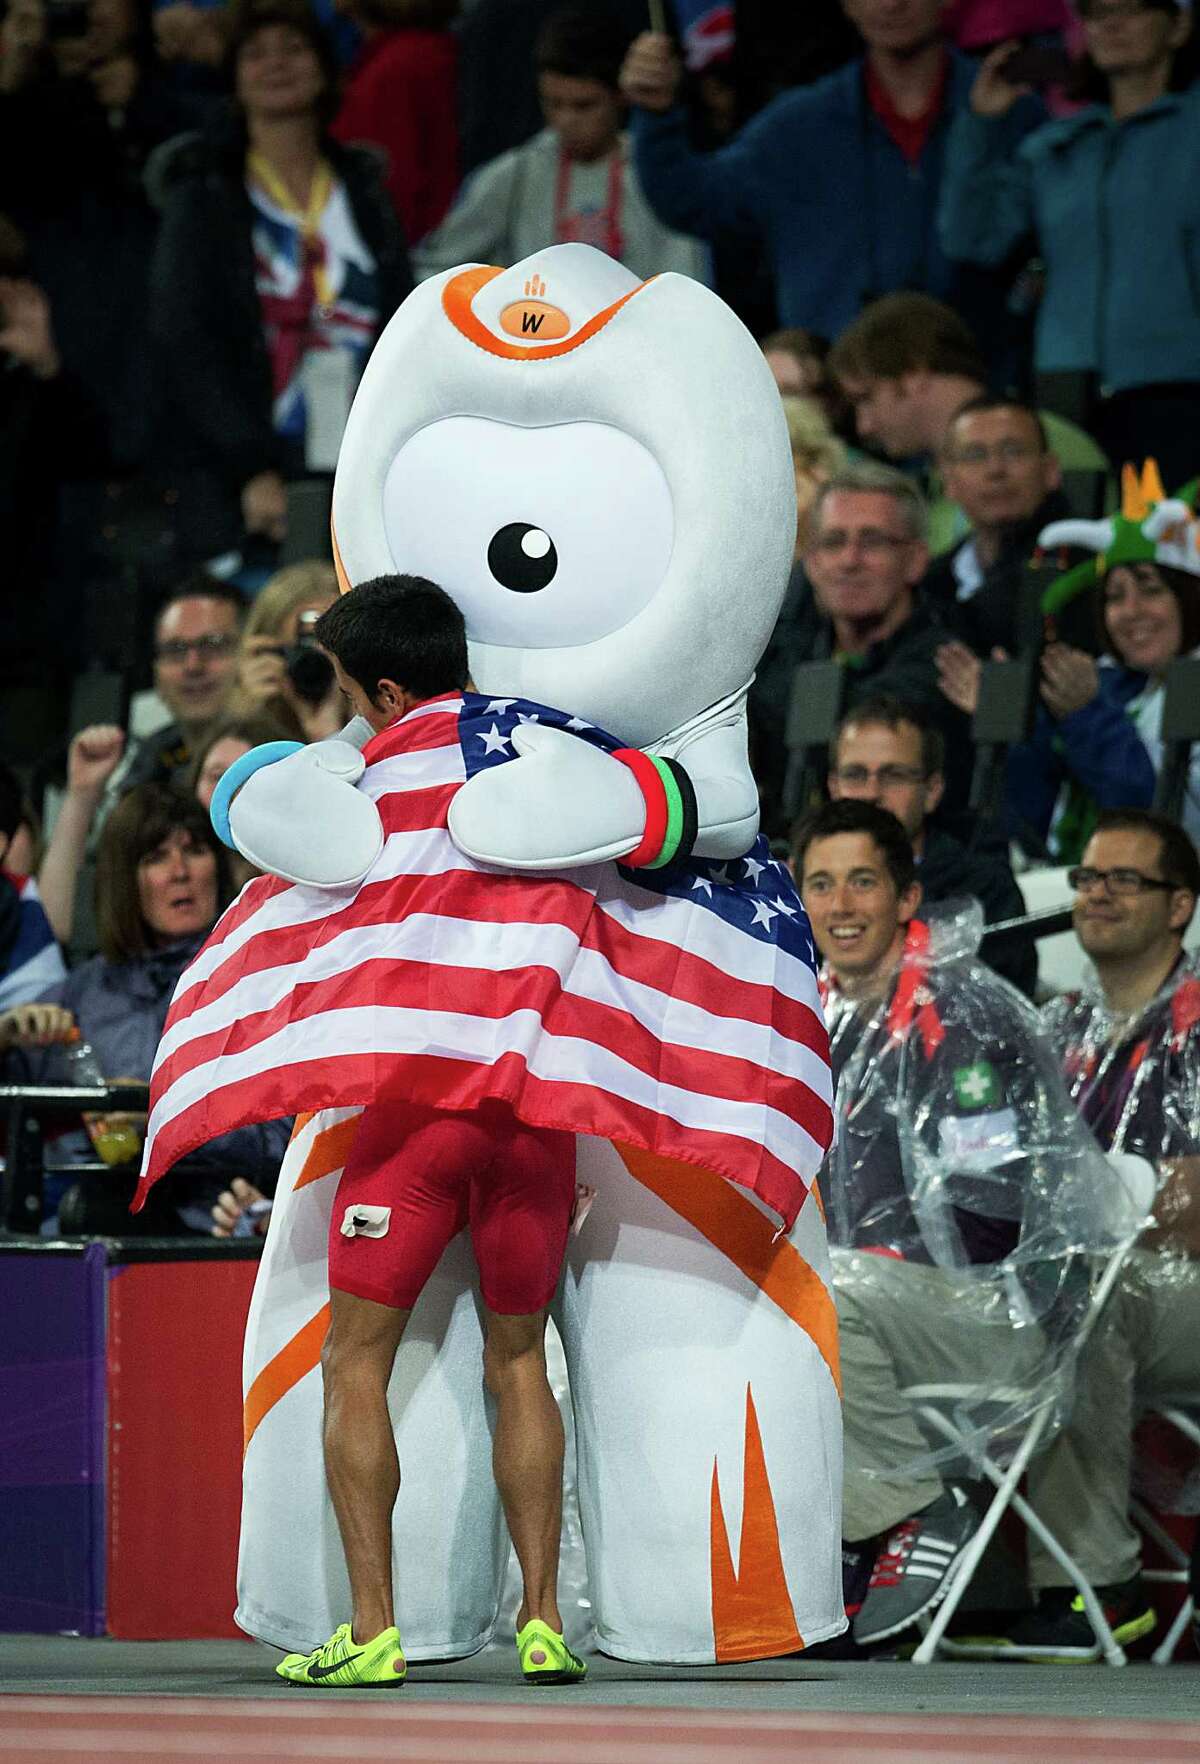 Leo Manzano of the USA gets a hug from London 2012 macot Wenlock after winning the silver medal in the men's 1,500-meters final during at the 2012 London Olympics on Tuesday, Aug. 7, 2012.